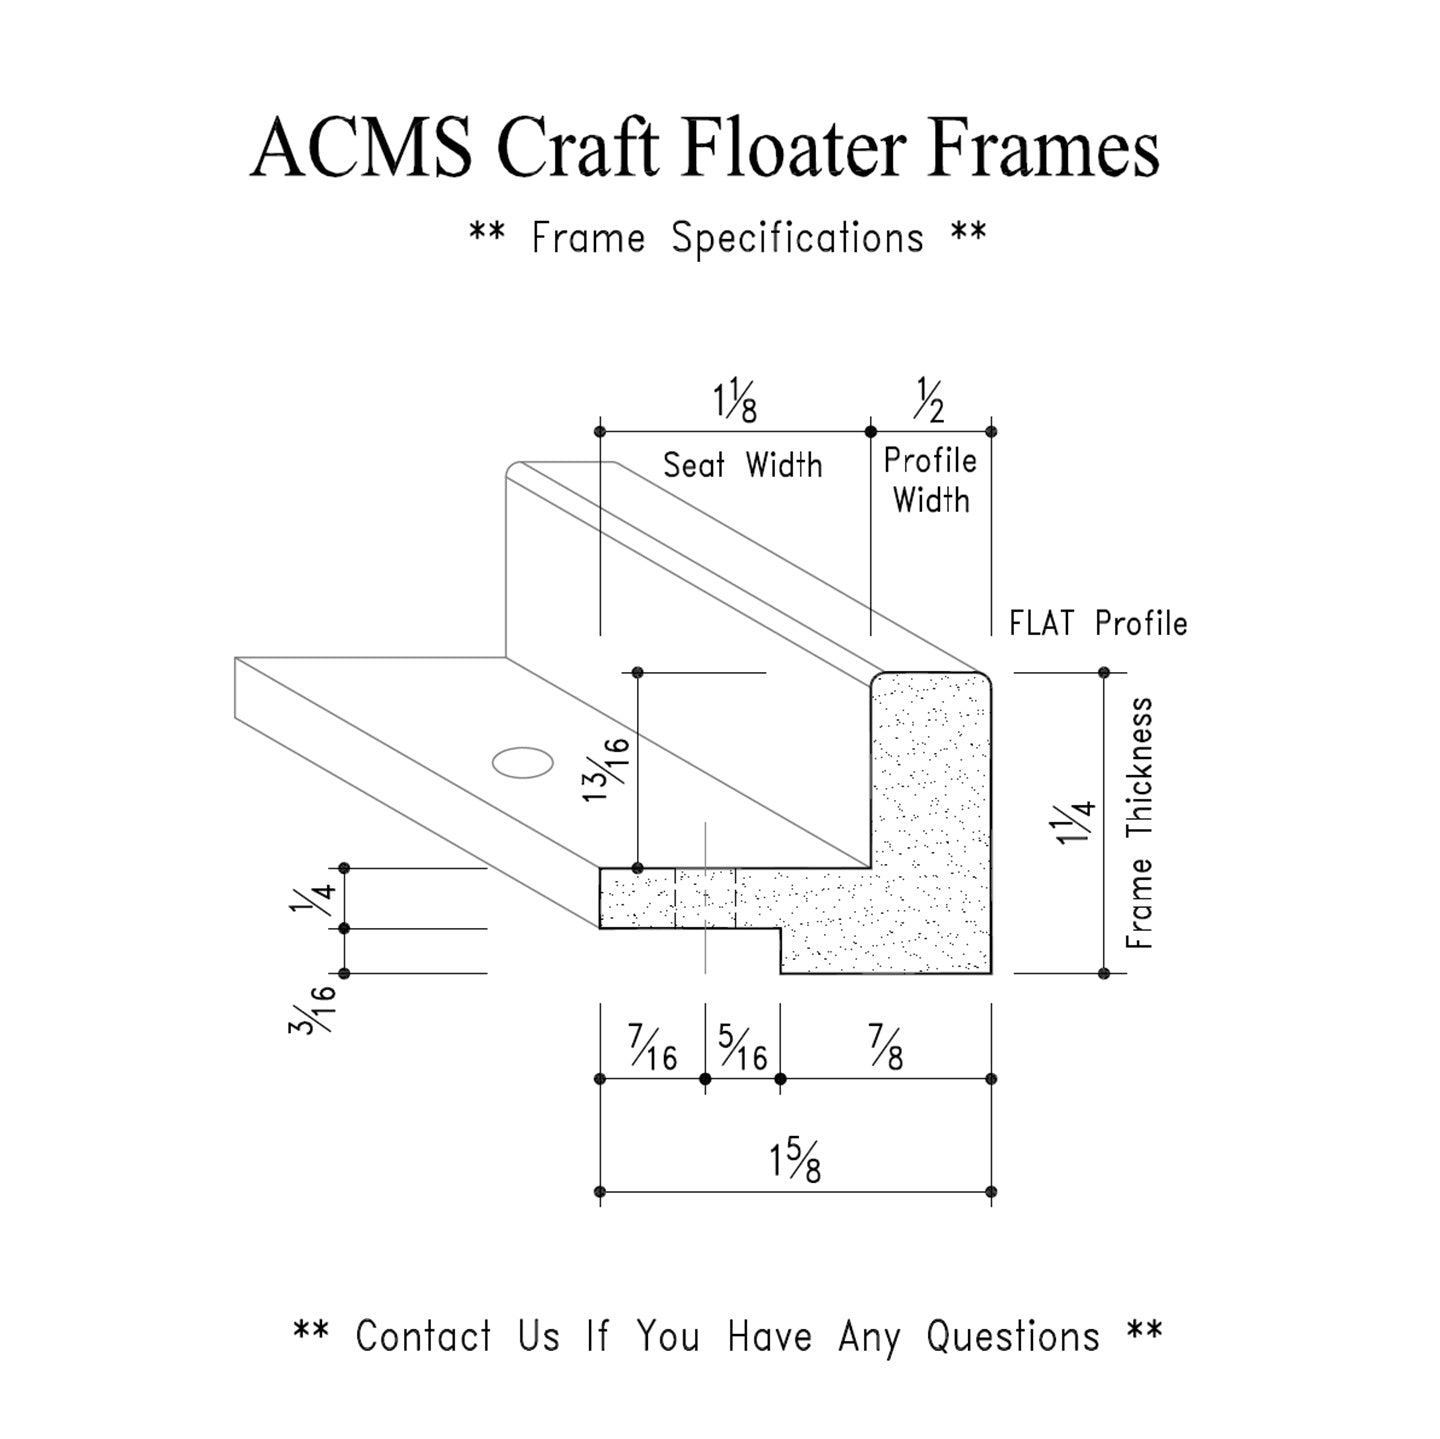 ACMS Soft Rectangular Craft Floater Frame - For 3/4" Thick Artwork - Profile 1/2" FLAT - 1 1/4" Thick Frame